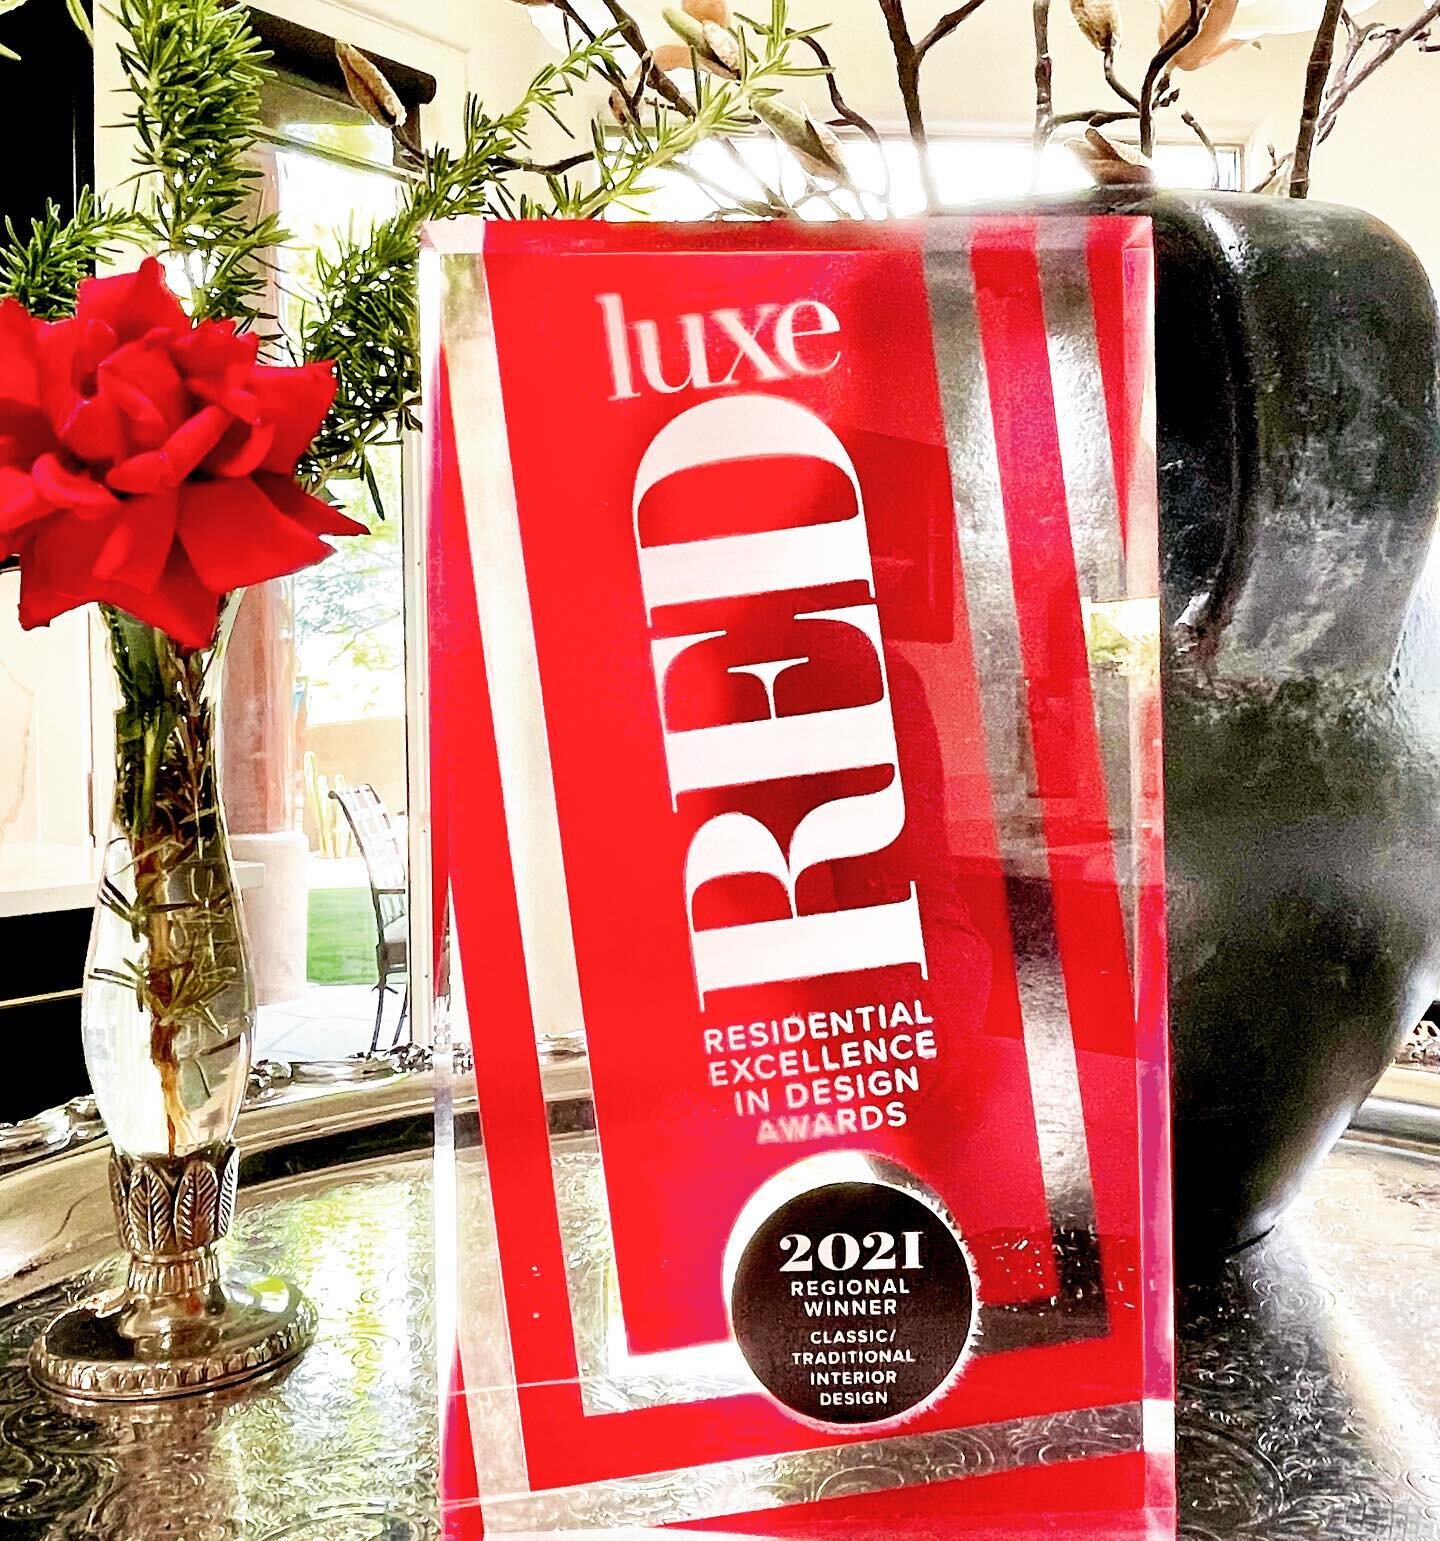 The award has arrived! Arizona 2021 Luxe Magazine RED award winner for Classic/Traditional interior design. Swipe 👉🏼 to see the award-winning project! #luxemagazine #luxemagazinearizona